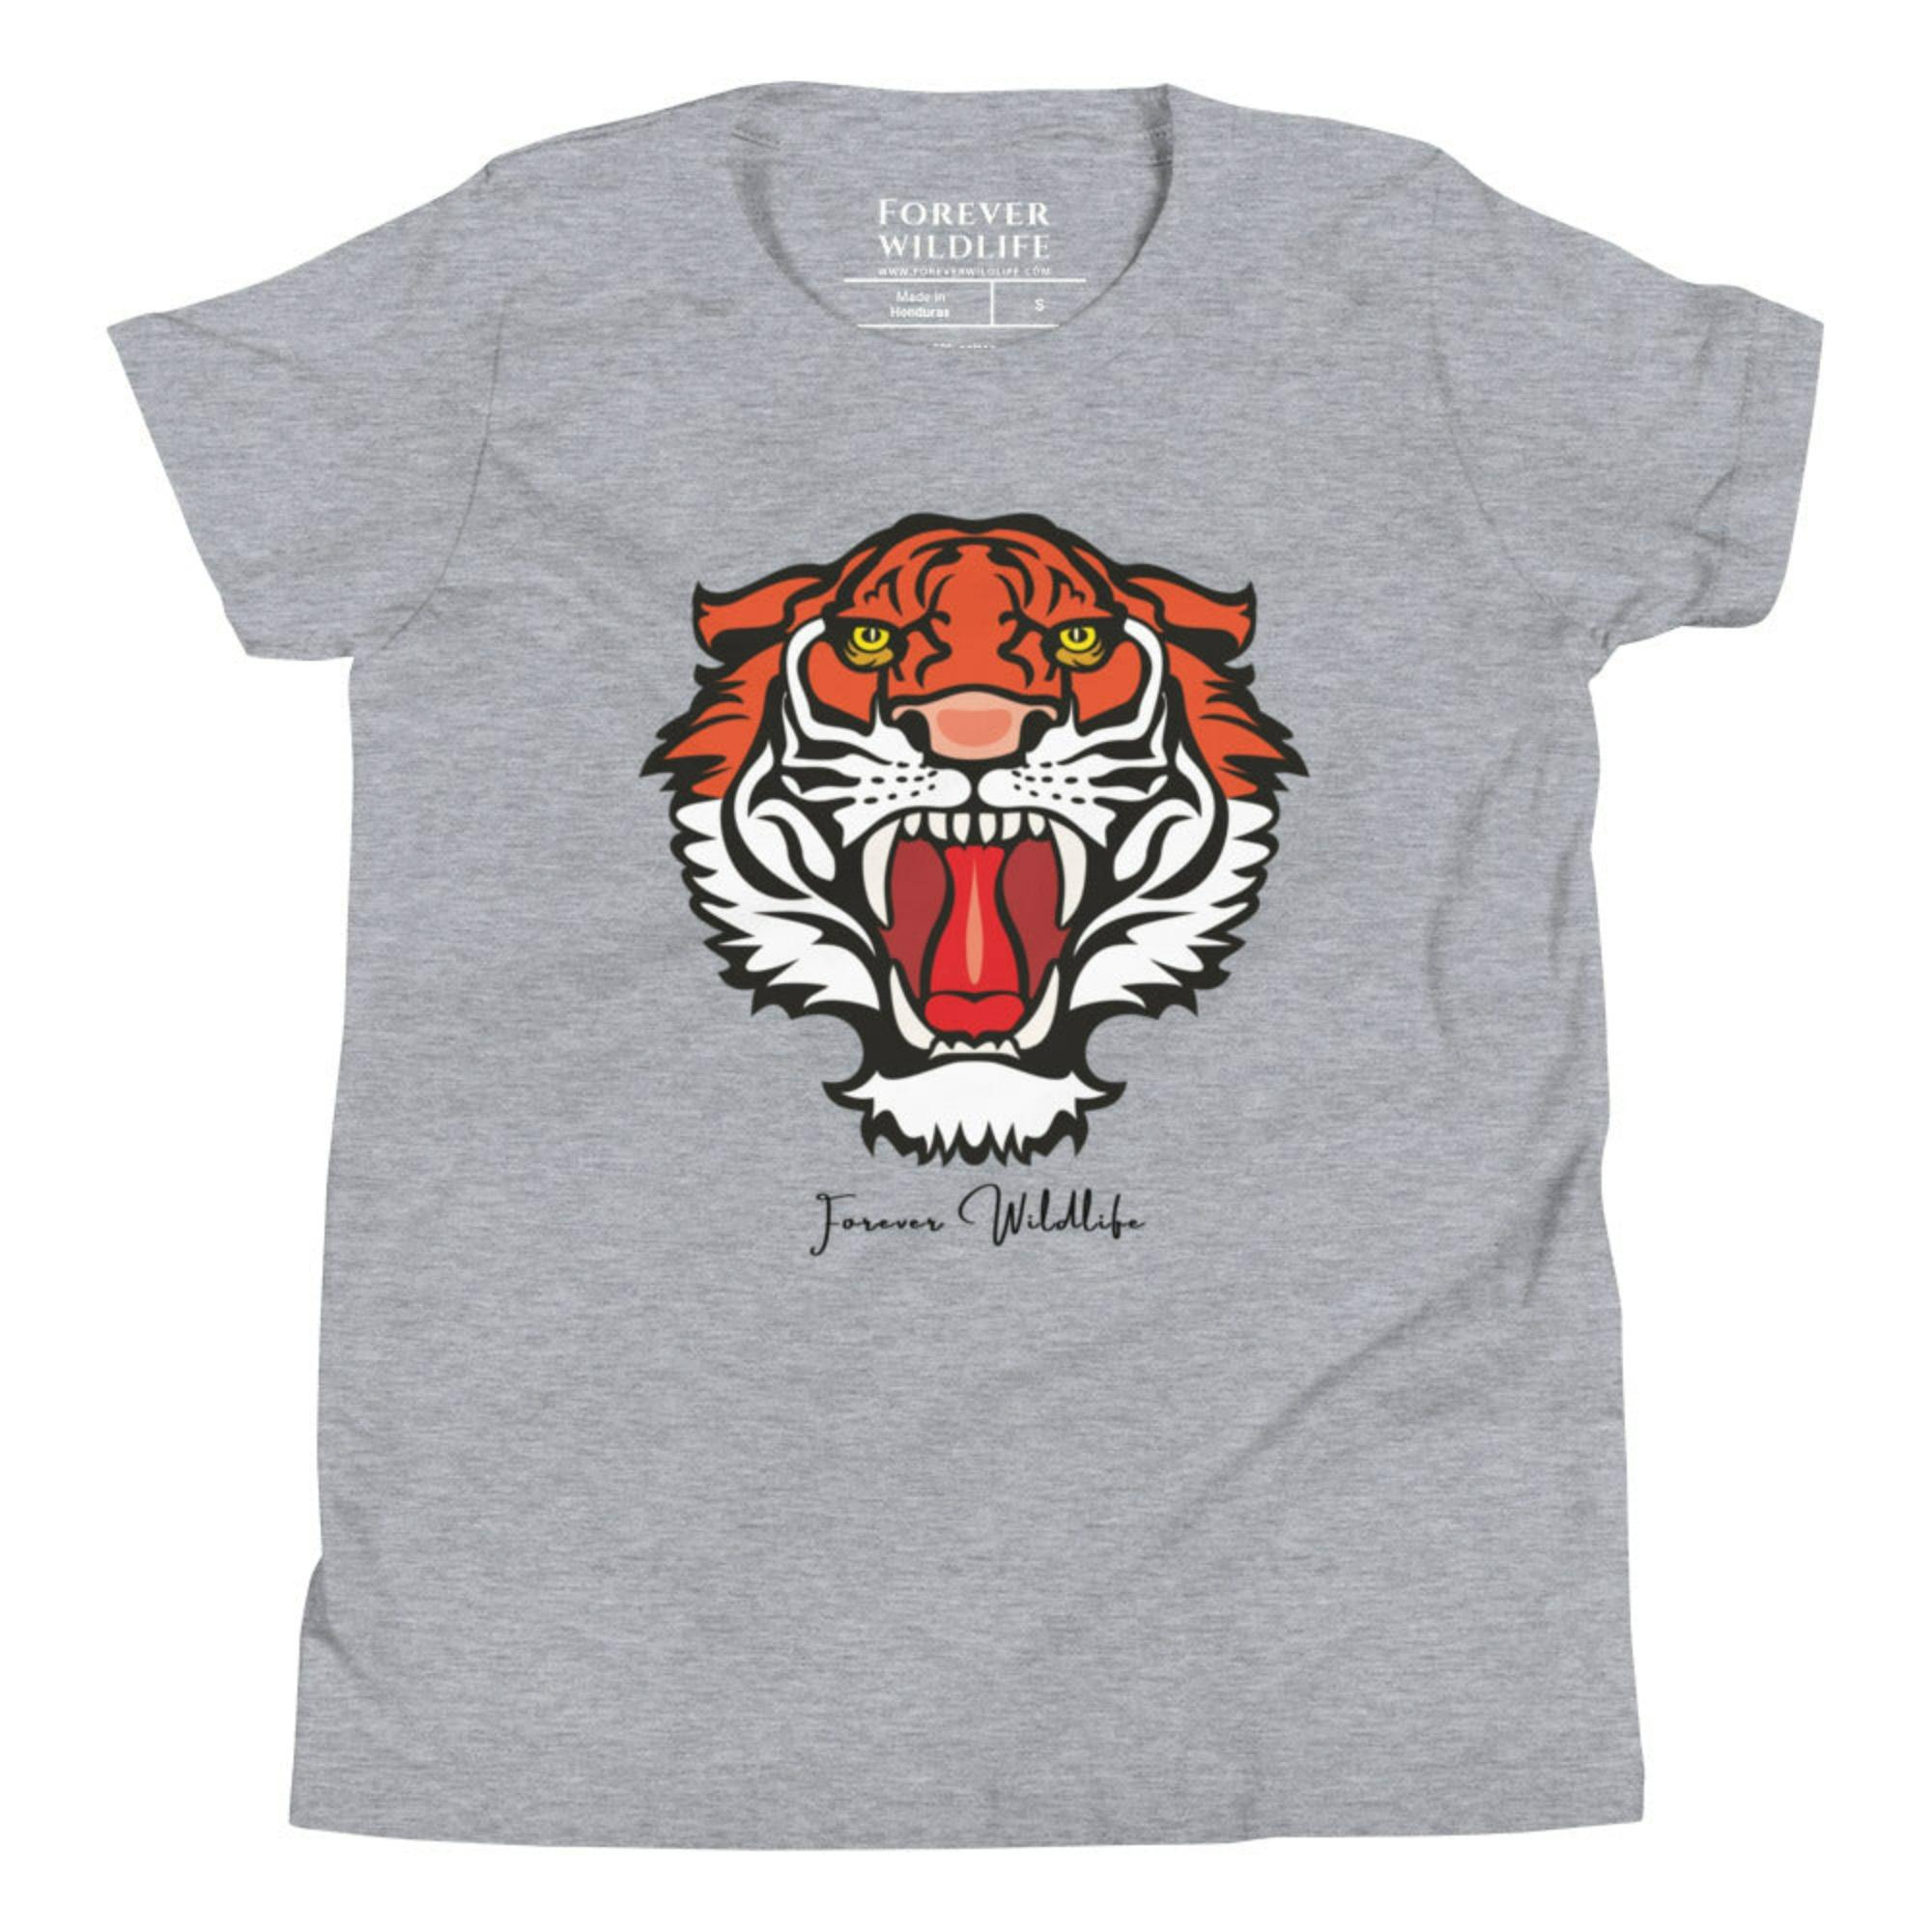 Grey Heather Youth T-Shirt with Tiger graphic as part of Wildlife T Shirts, Wildlife Clothing & Apparel by Forever Wildlife